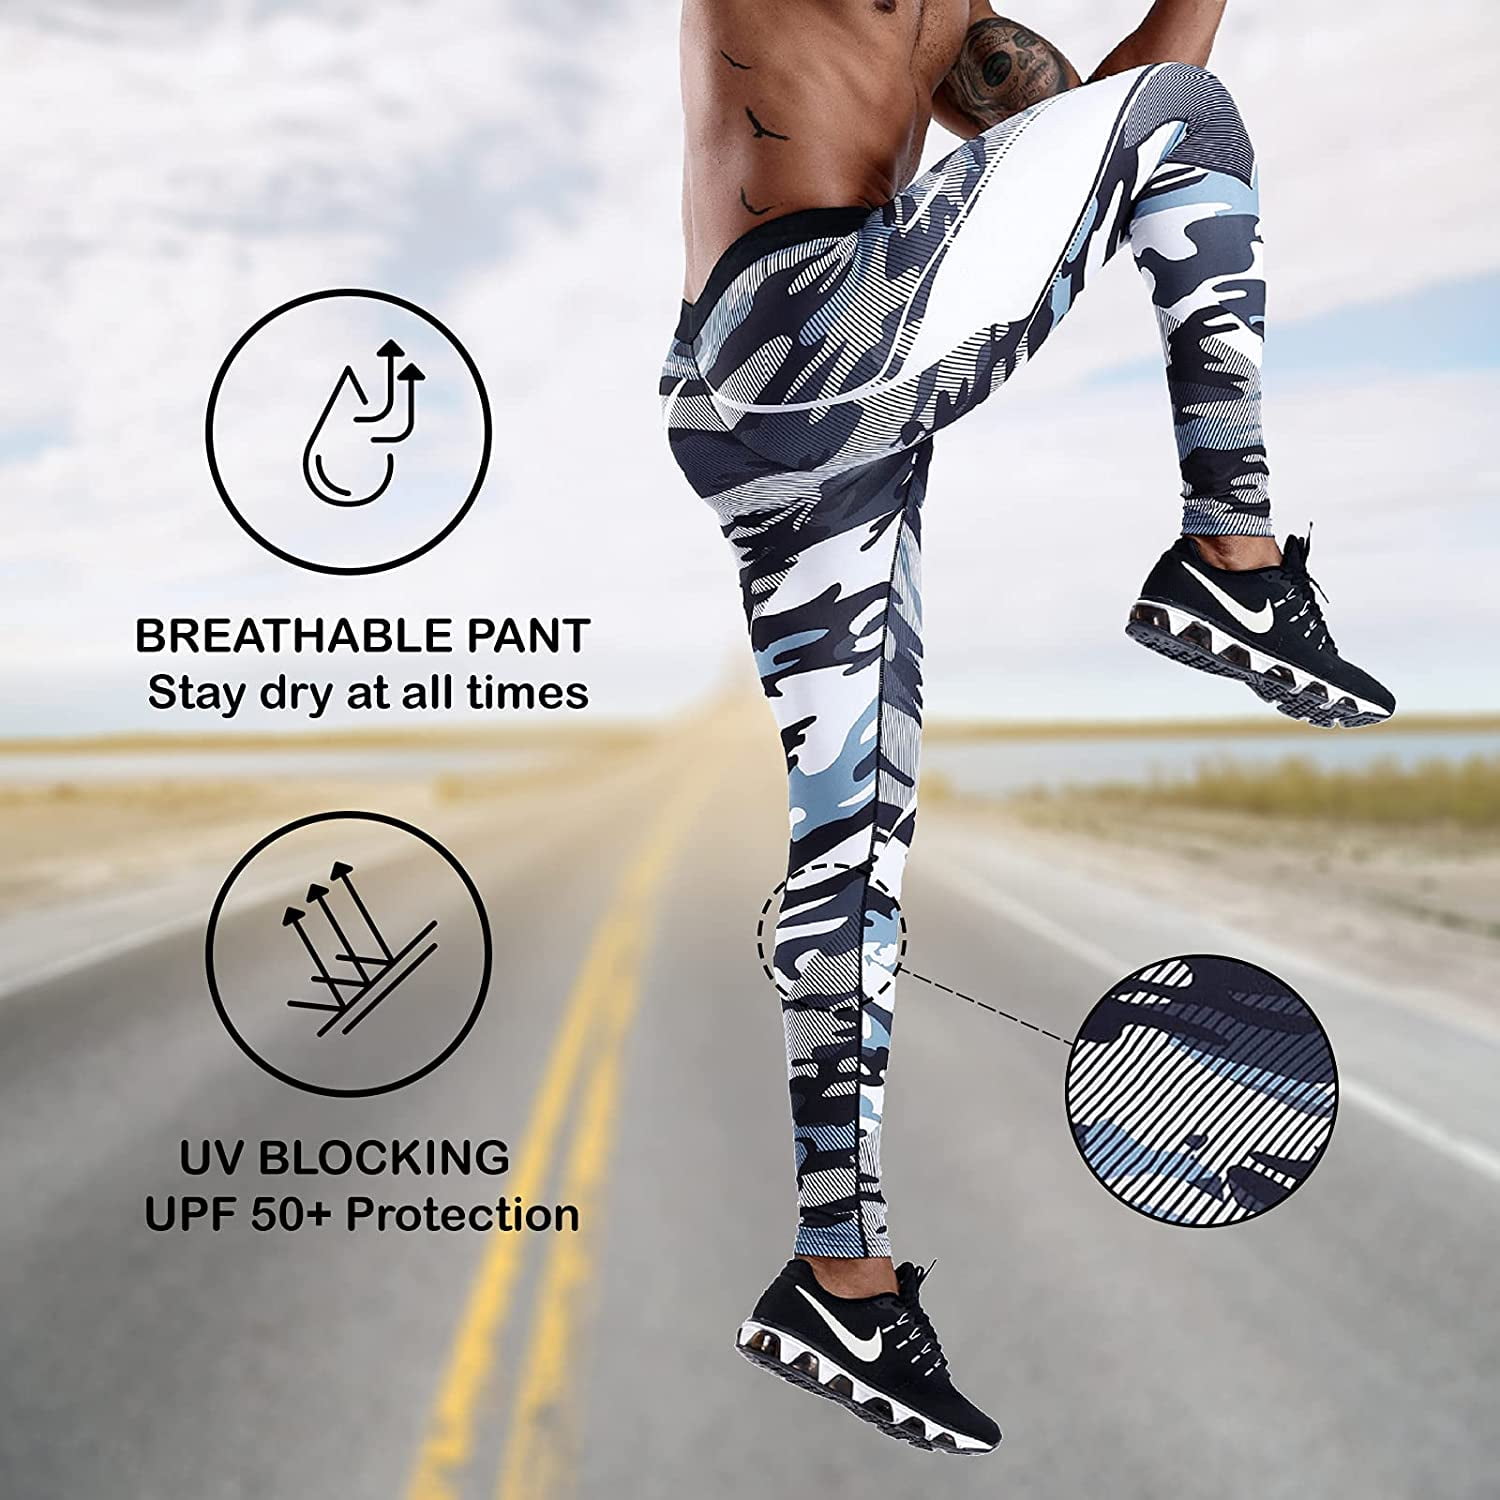 OEBLD Compression Pants Men UV Blocking Running Tights 1 or 2 Pack Gym Yoga Leggings for Athletic Workout 